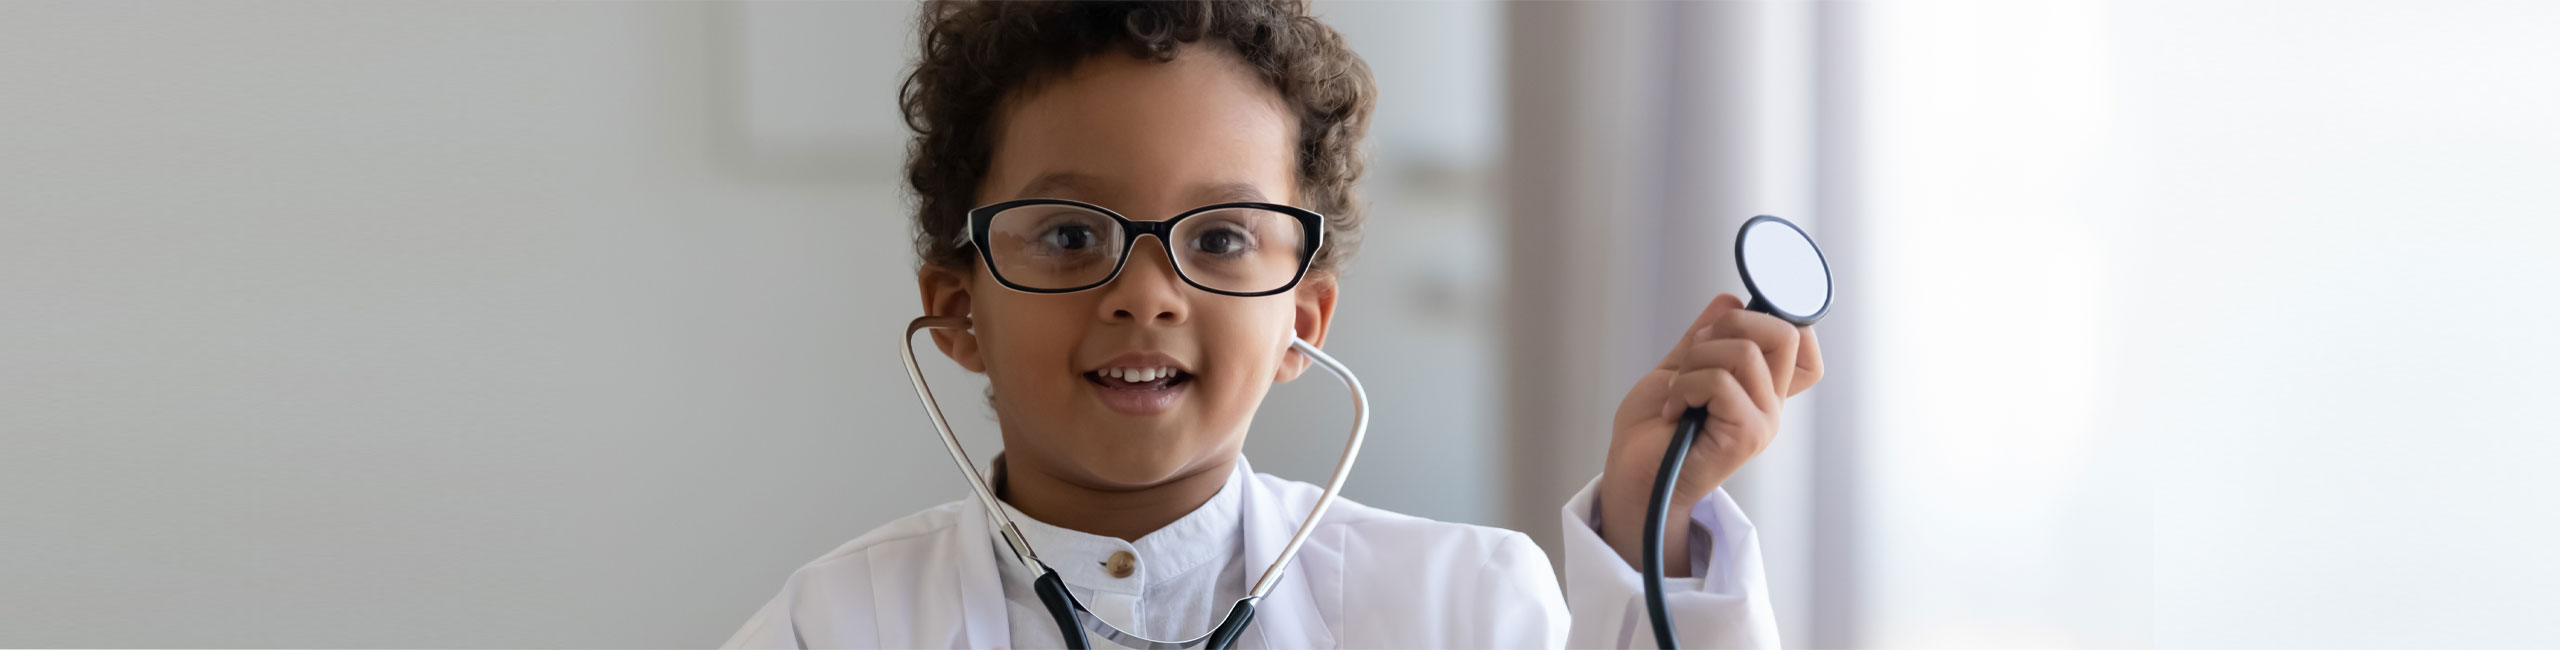 Banner picture of a little boy with a stethoscope in his ears and holding the stethoscope out.